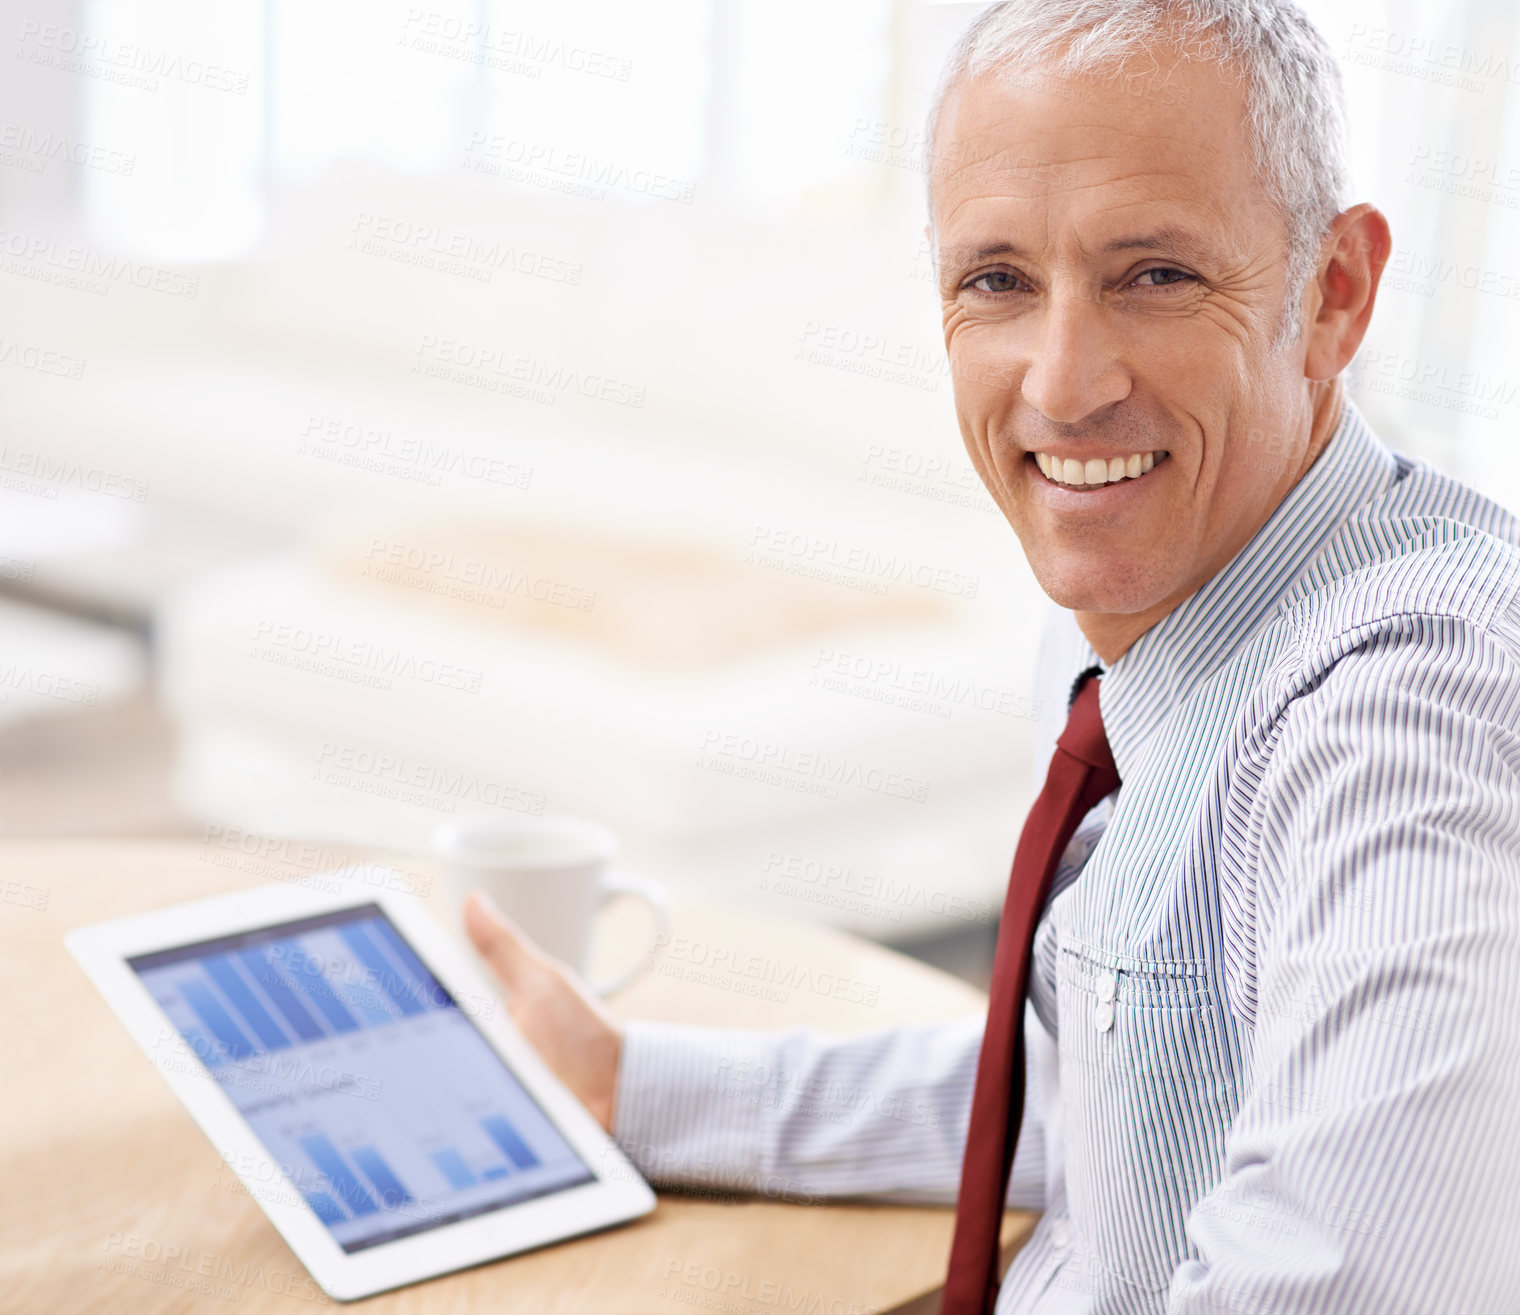 Buy stock photo Shot of a businessman looking pleased at the quarterly results he sees on his tablet